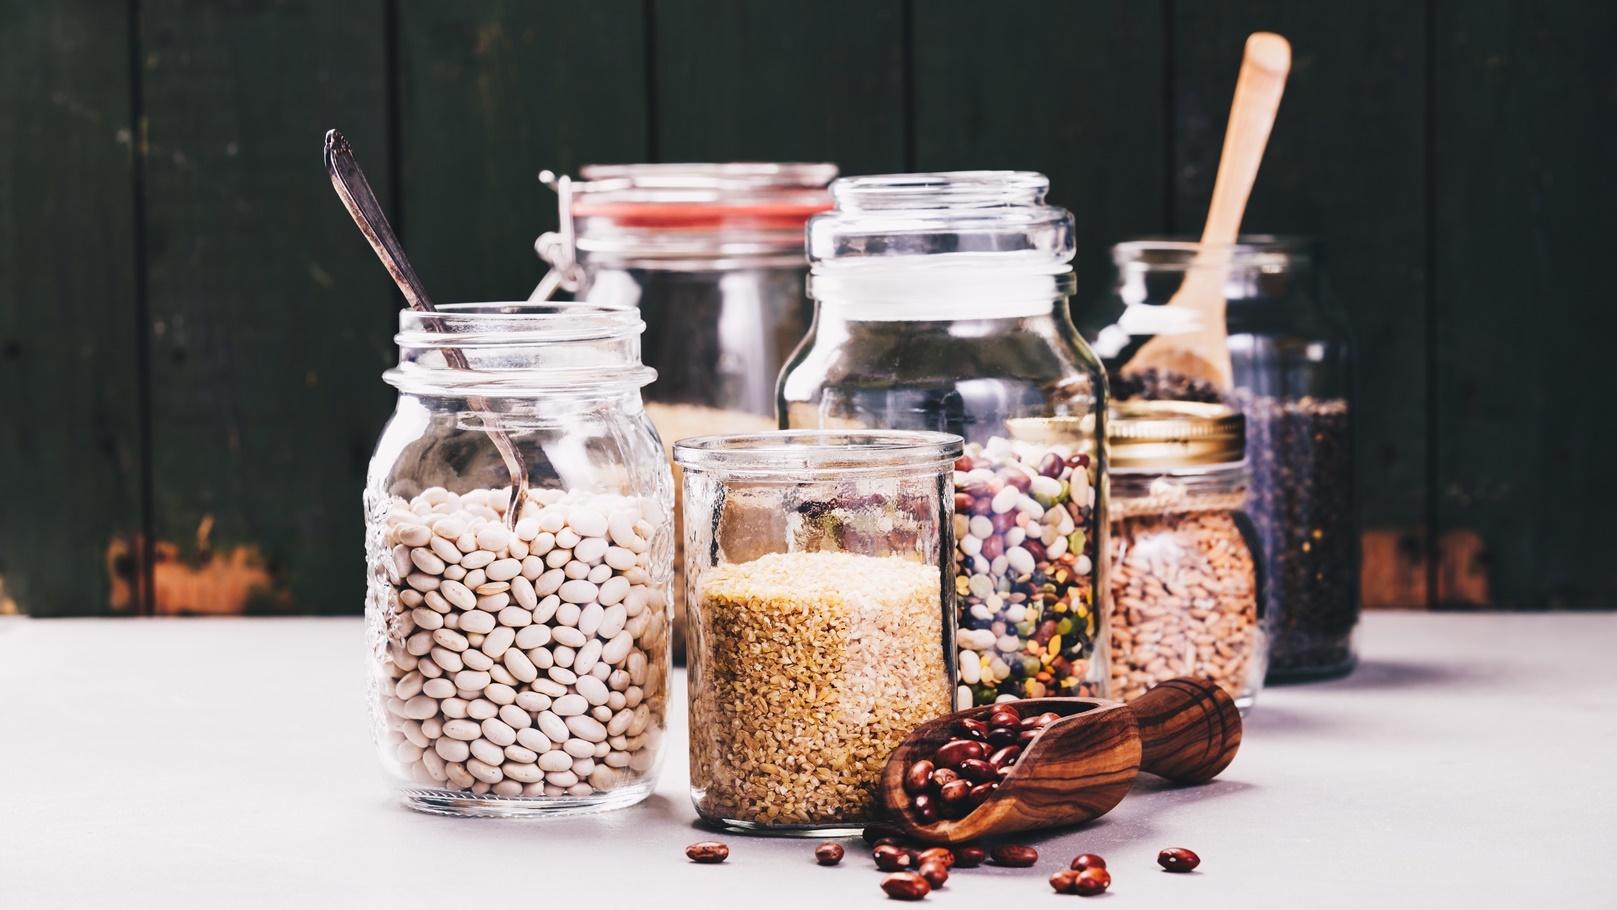 glass-jars-with-various-legumes-and-grains-2021-08-26-16-35-54-utc